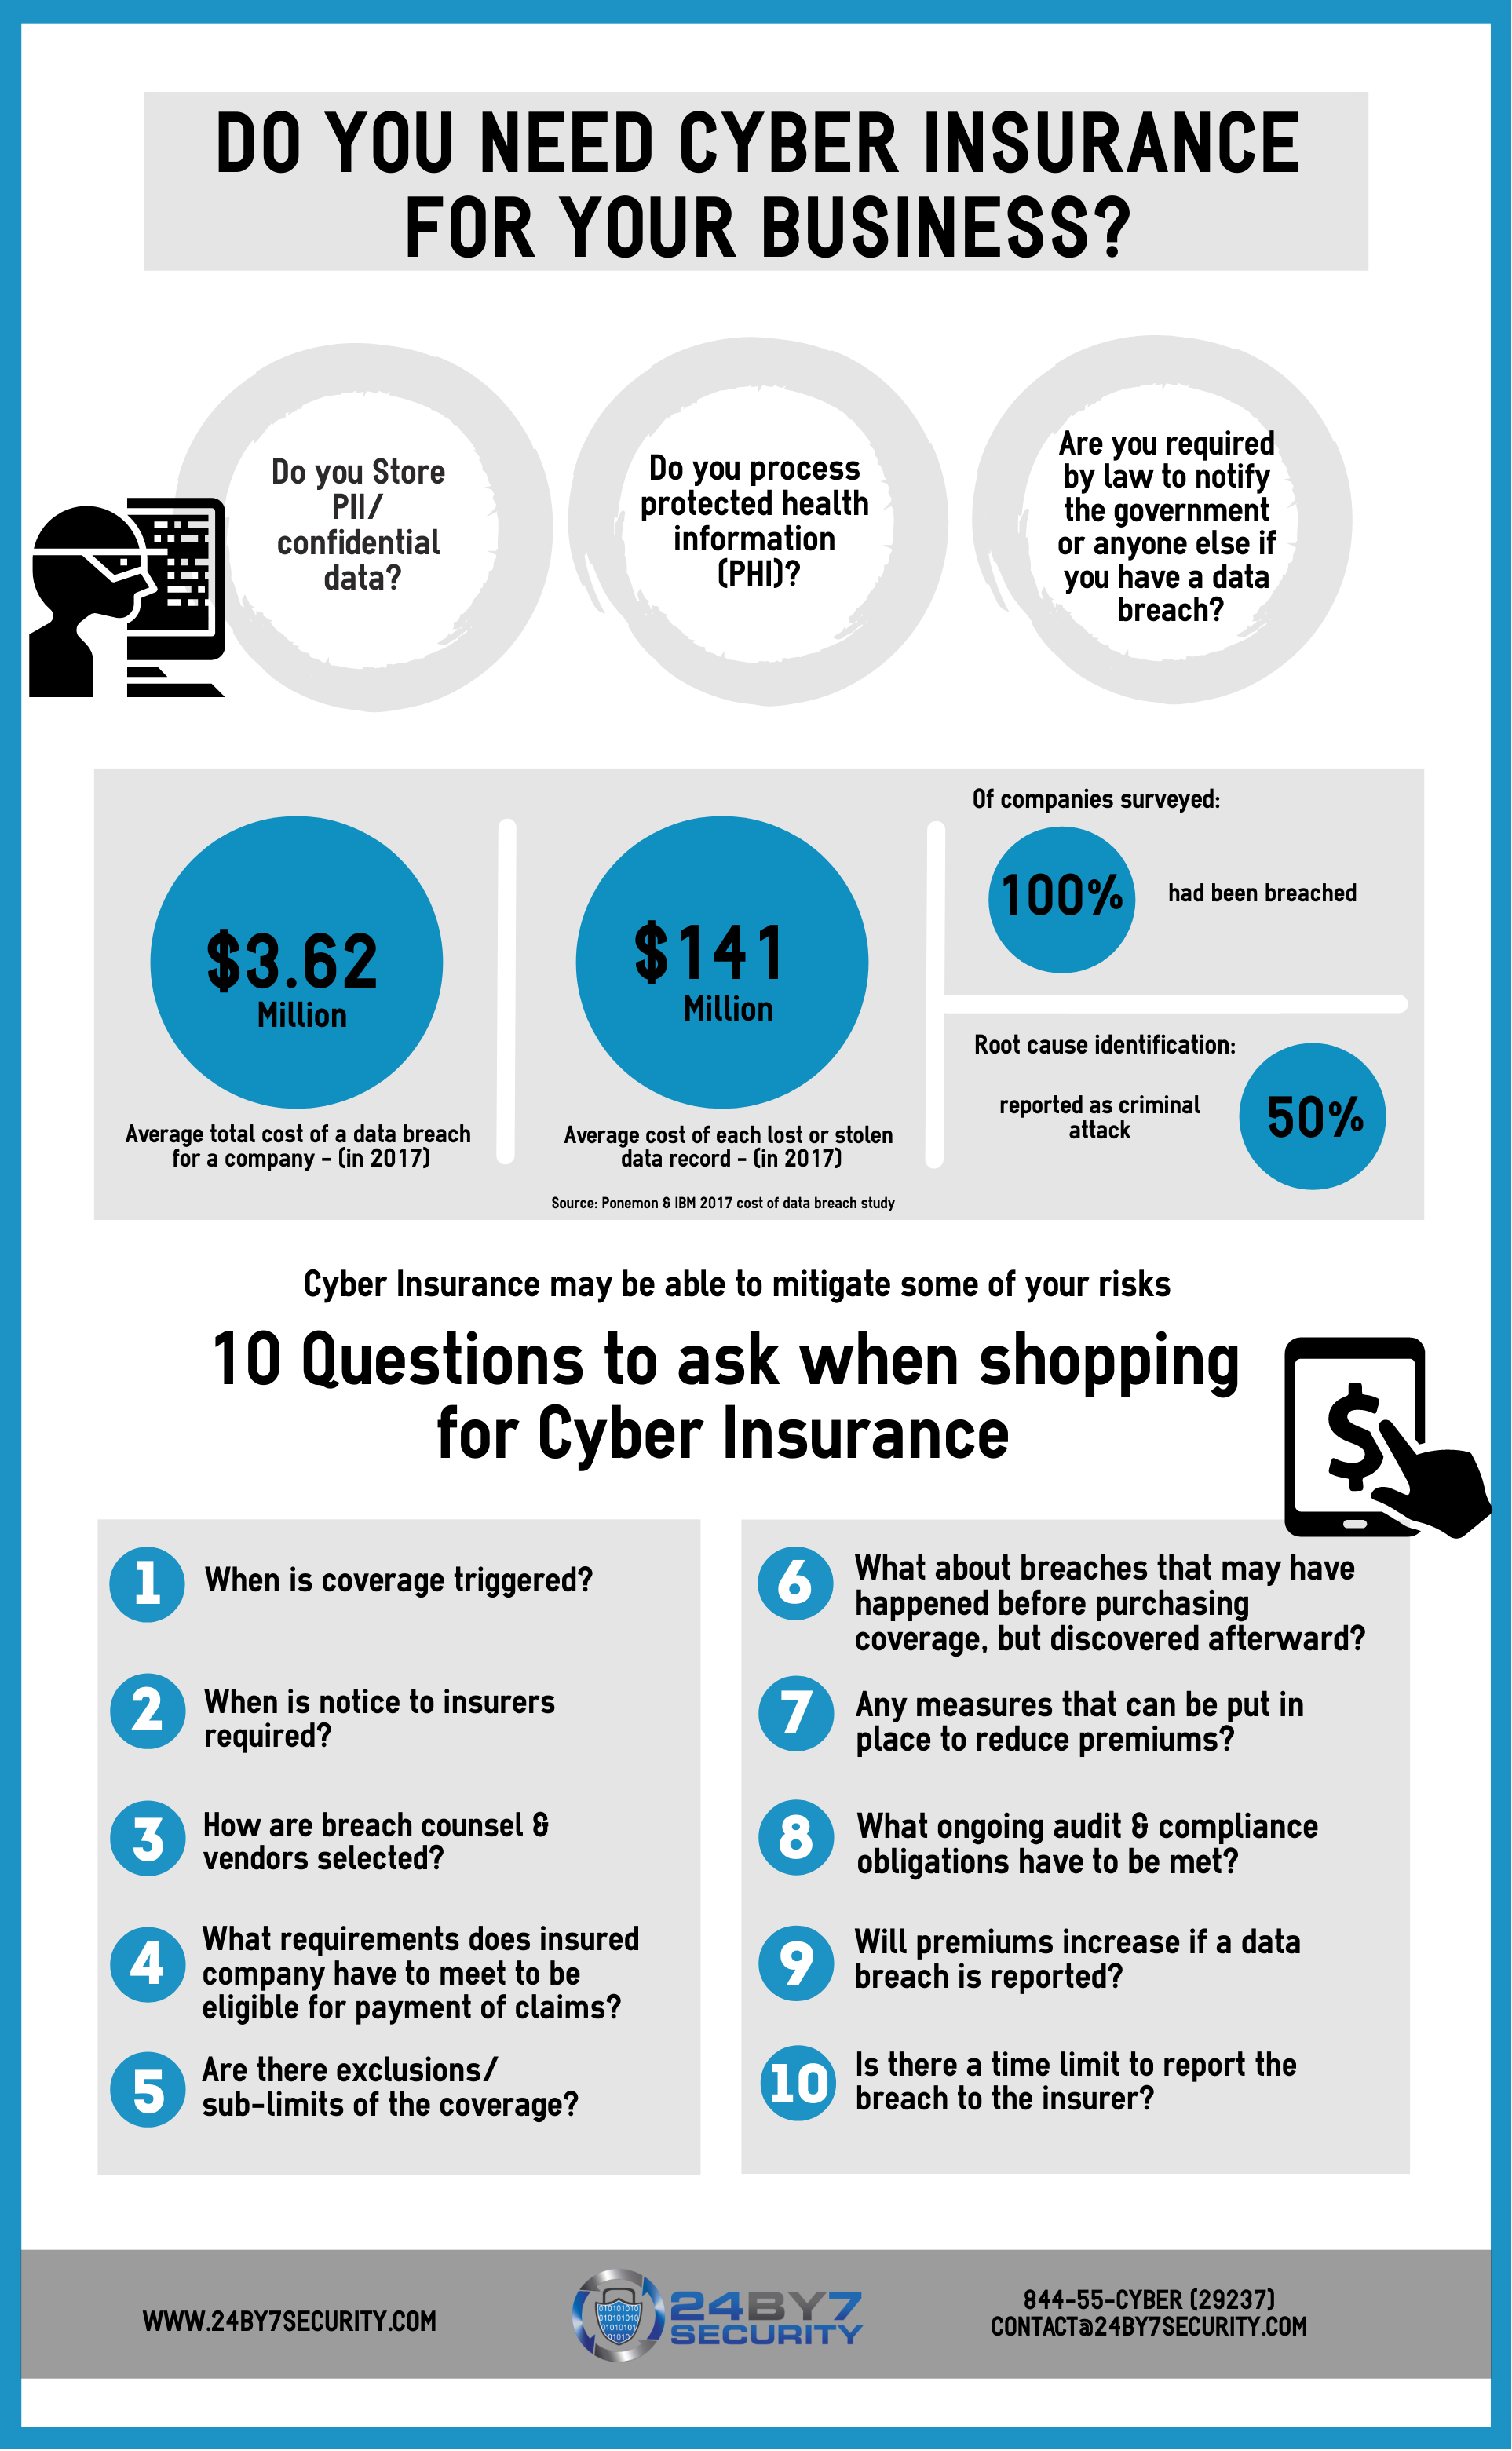 Does business insurance cover cyber-attacks and data breaches?